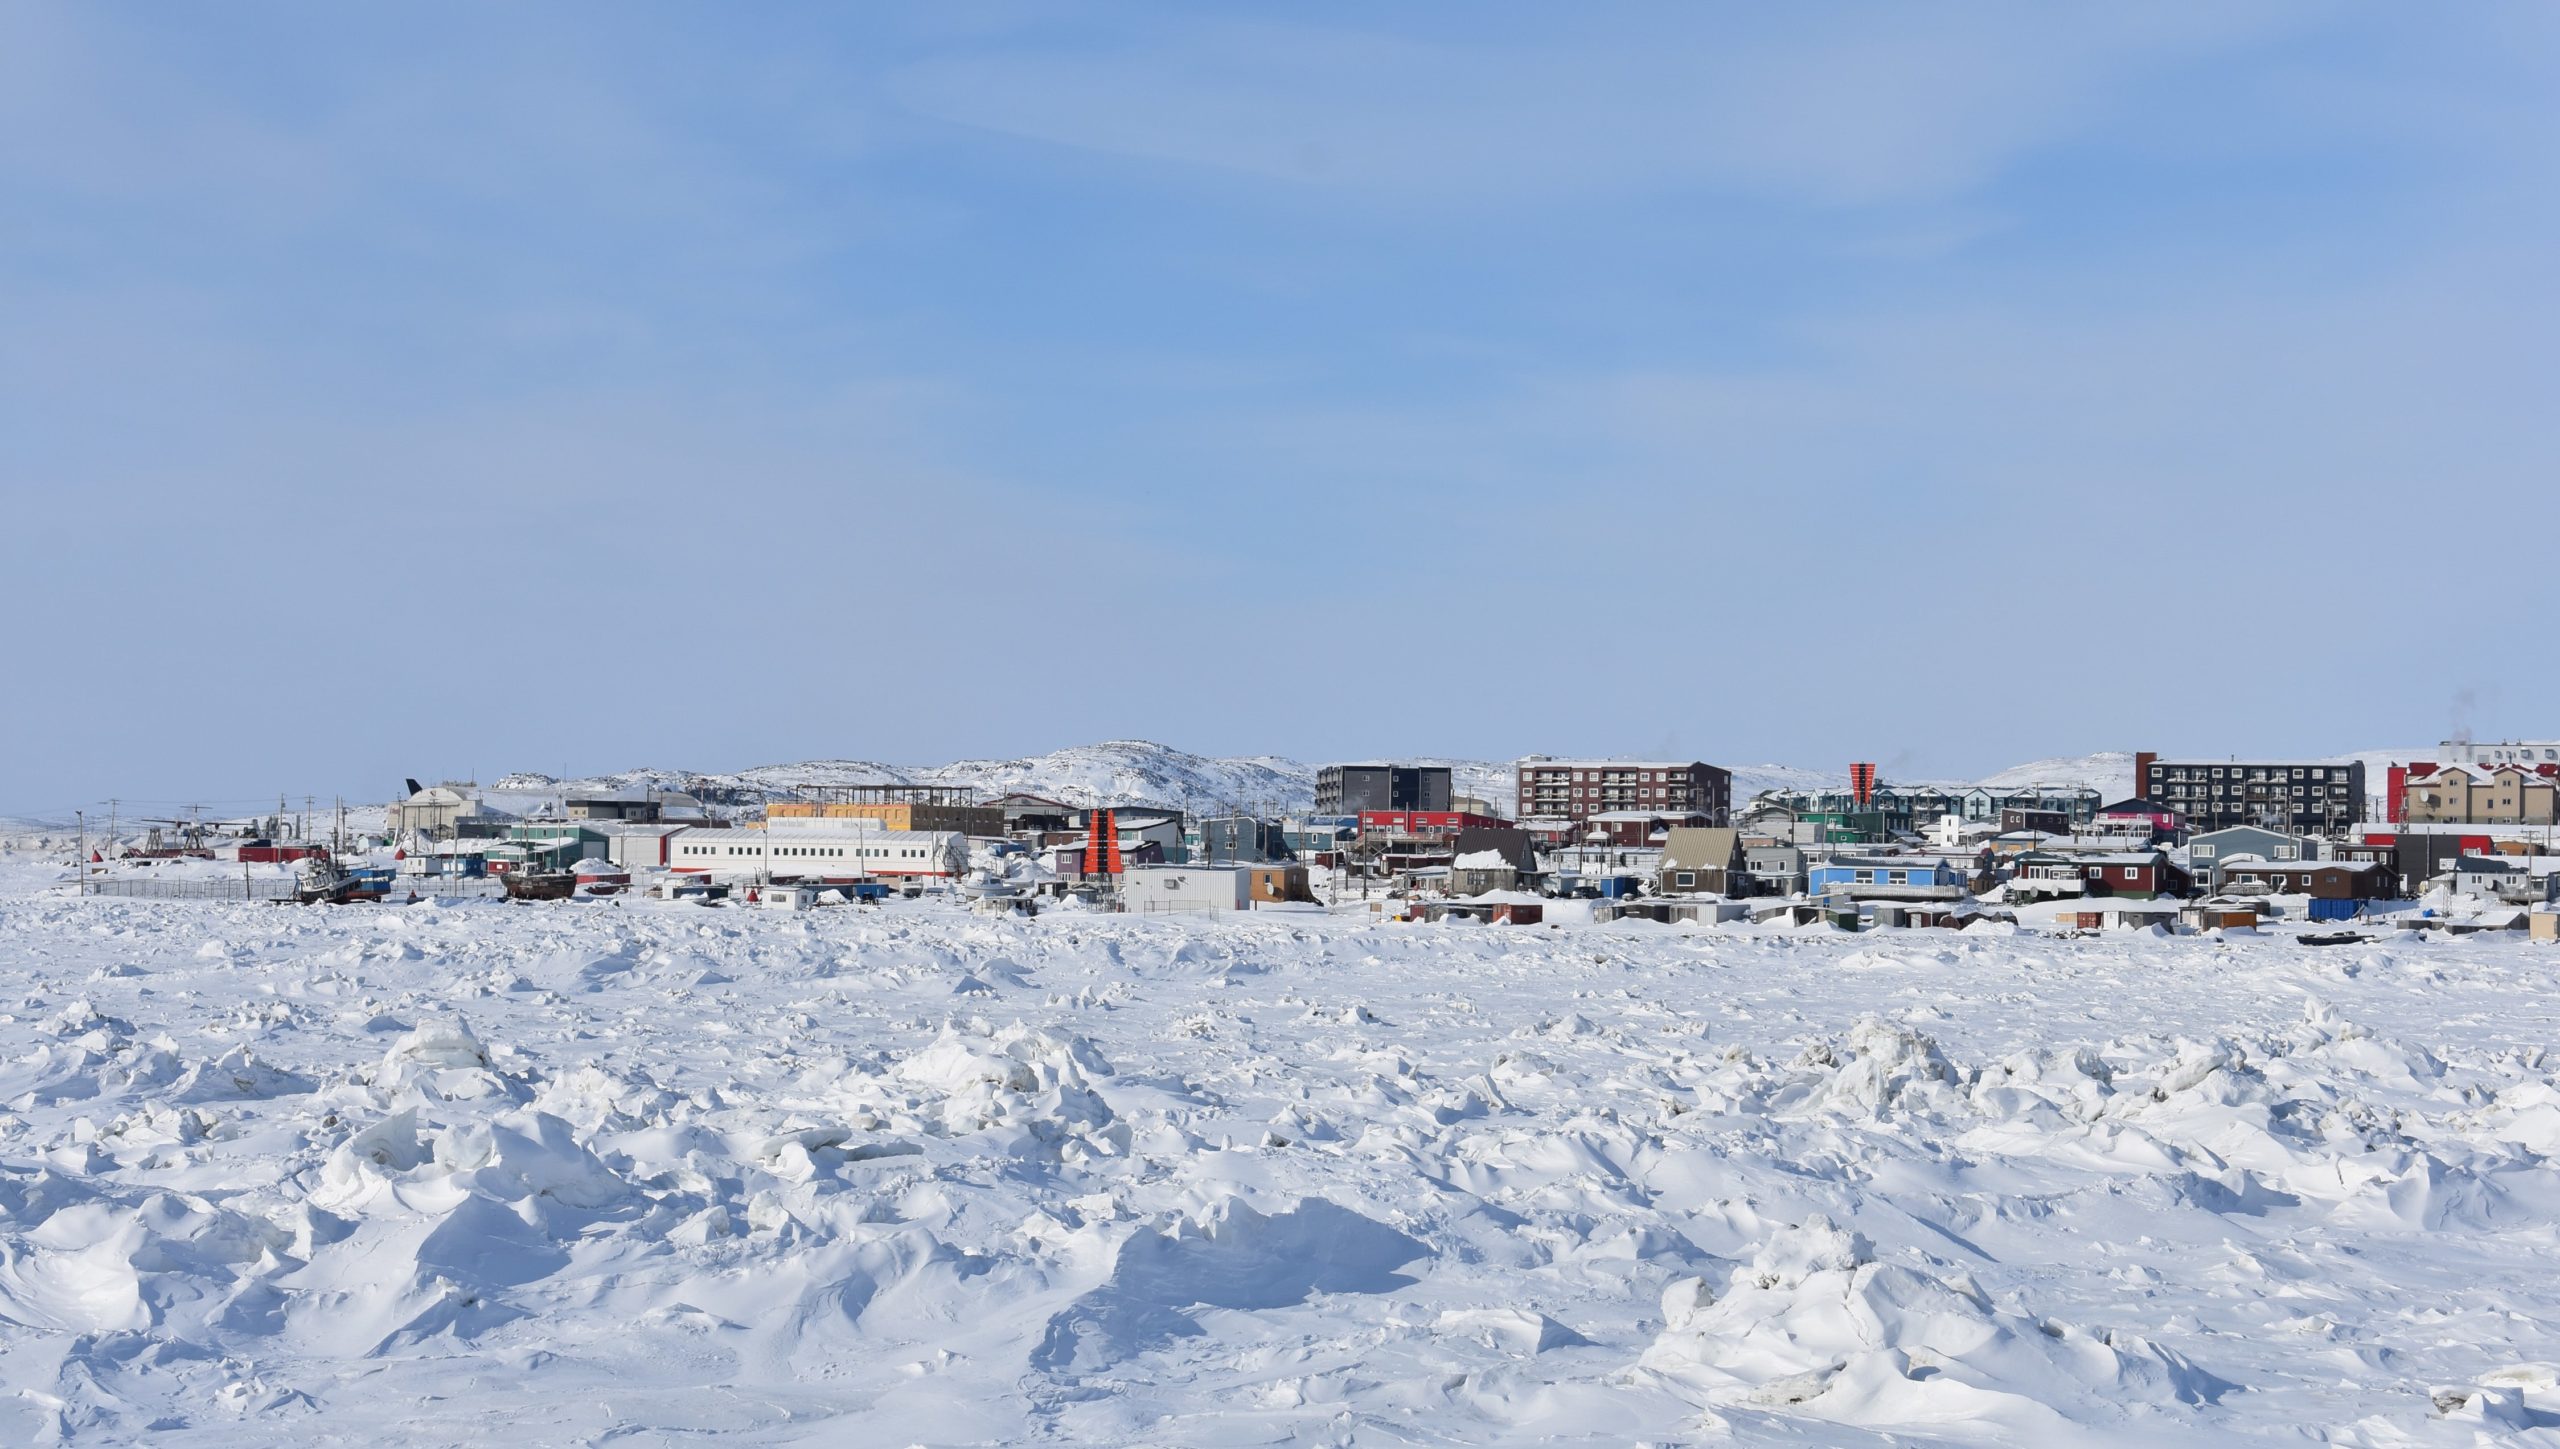 Image of Iqaluit from the Arctic Sea Ice in Spring 2021, colorful buildings can be seen along with a blue sky and snow-covered ice